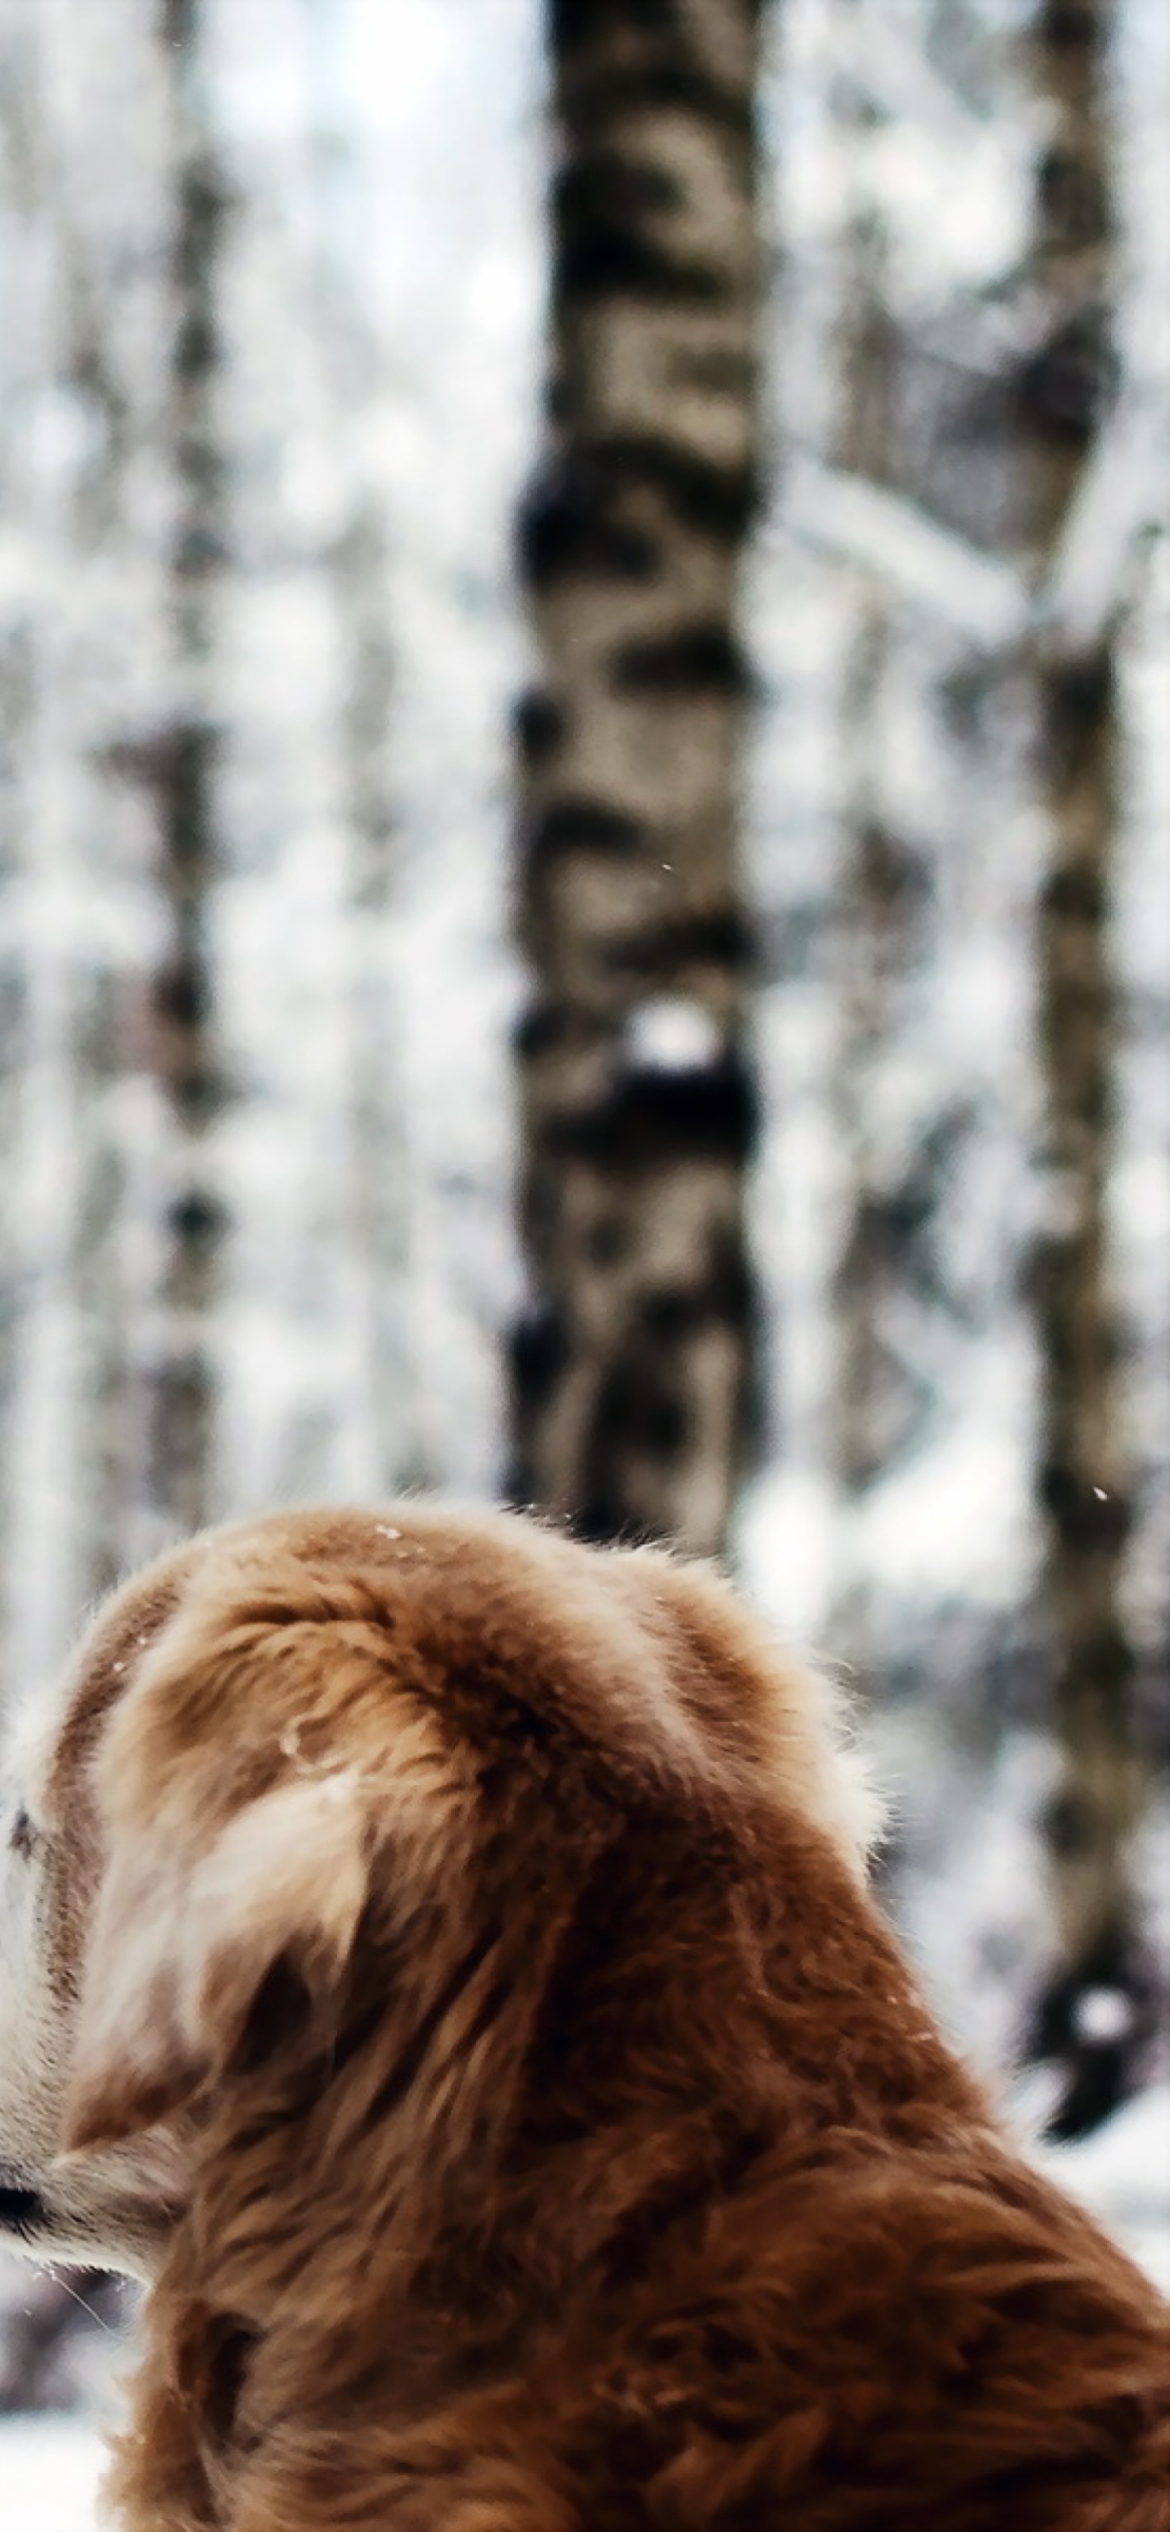 Dog Looking At Winter Landscape wallpaper 1170x2532